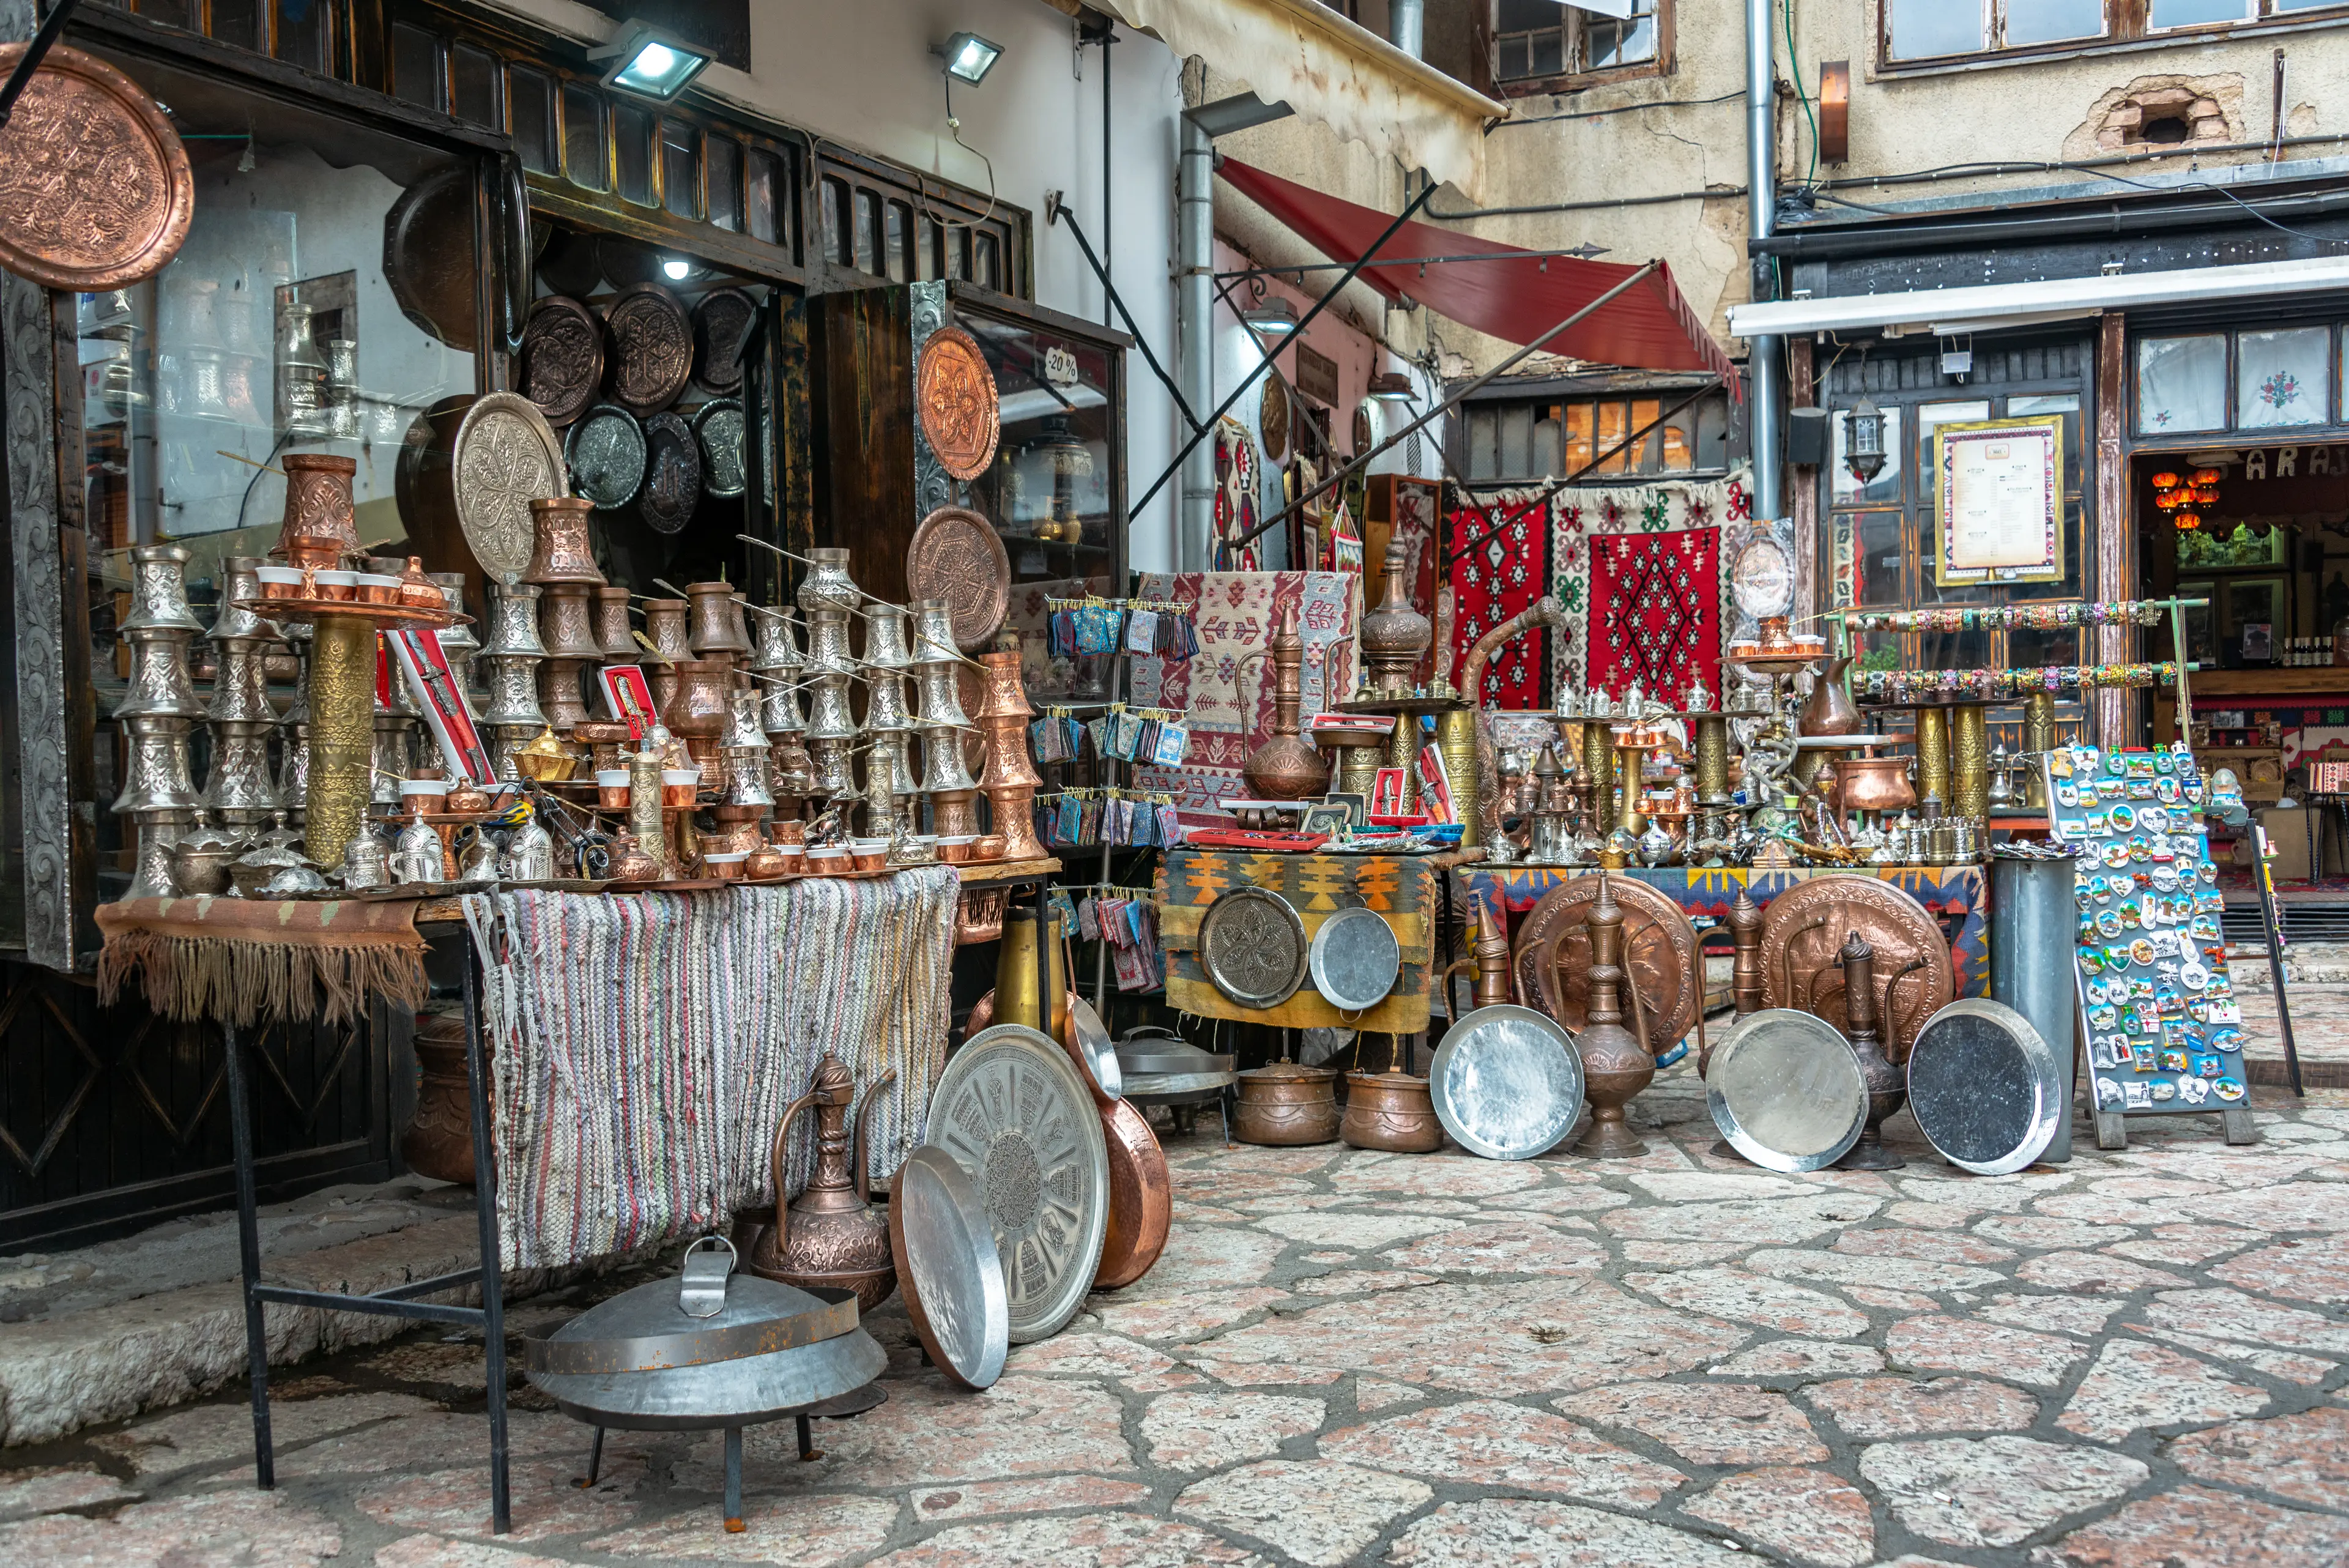 4-Day Local Family Experience in Sarajevo: Food, Wine & Shopping Adventure